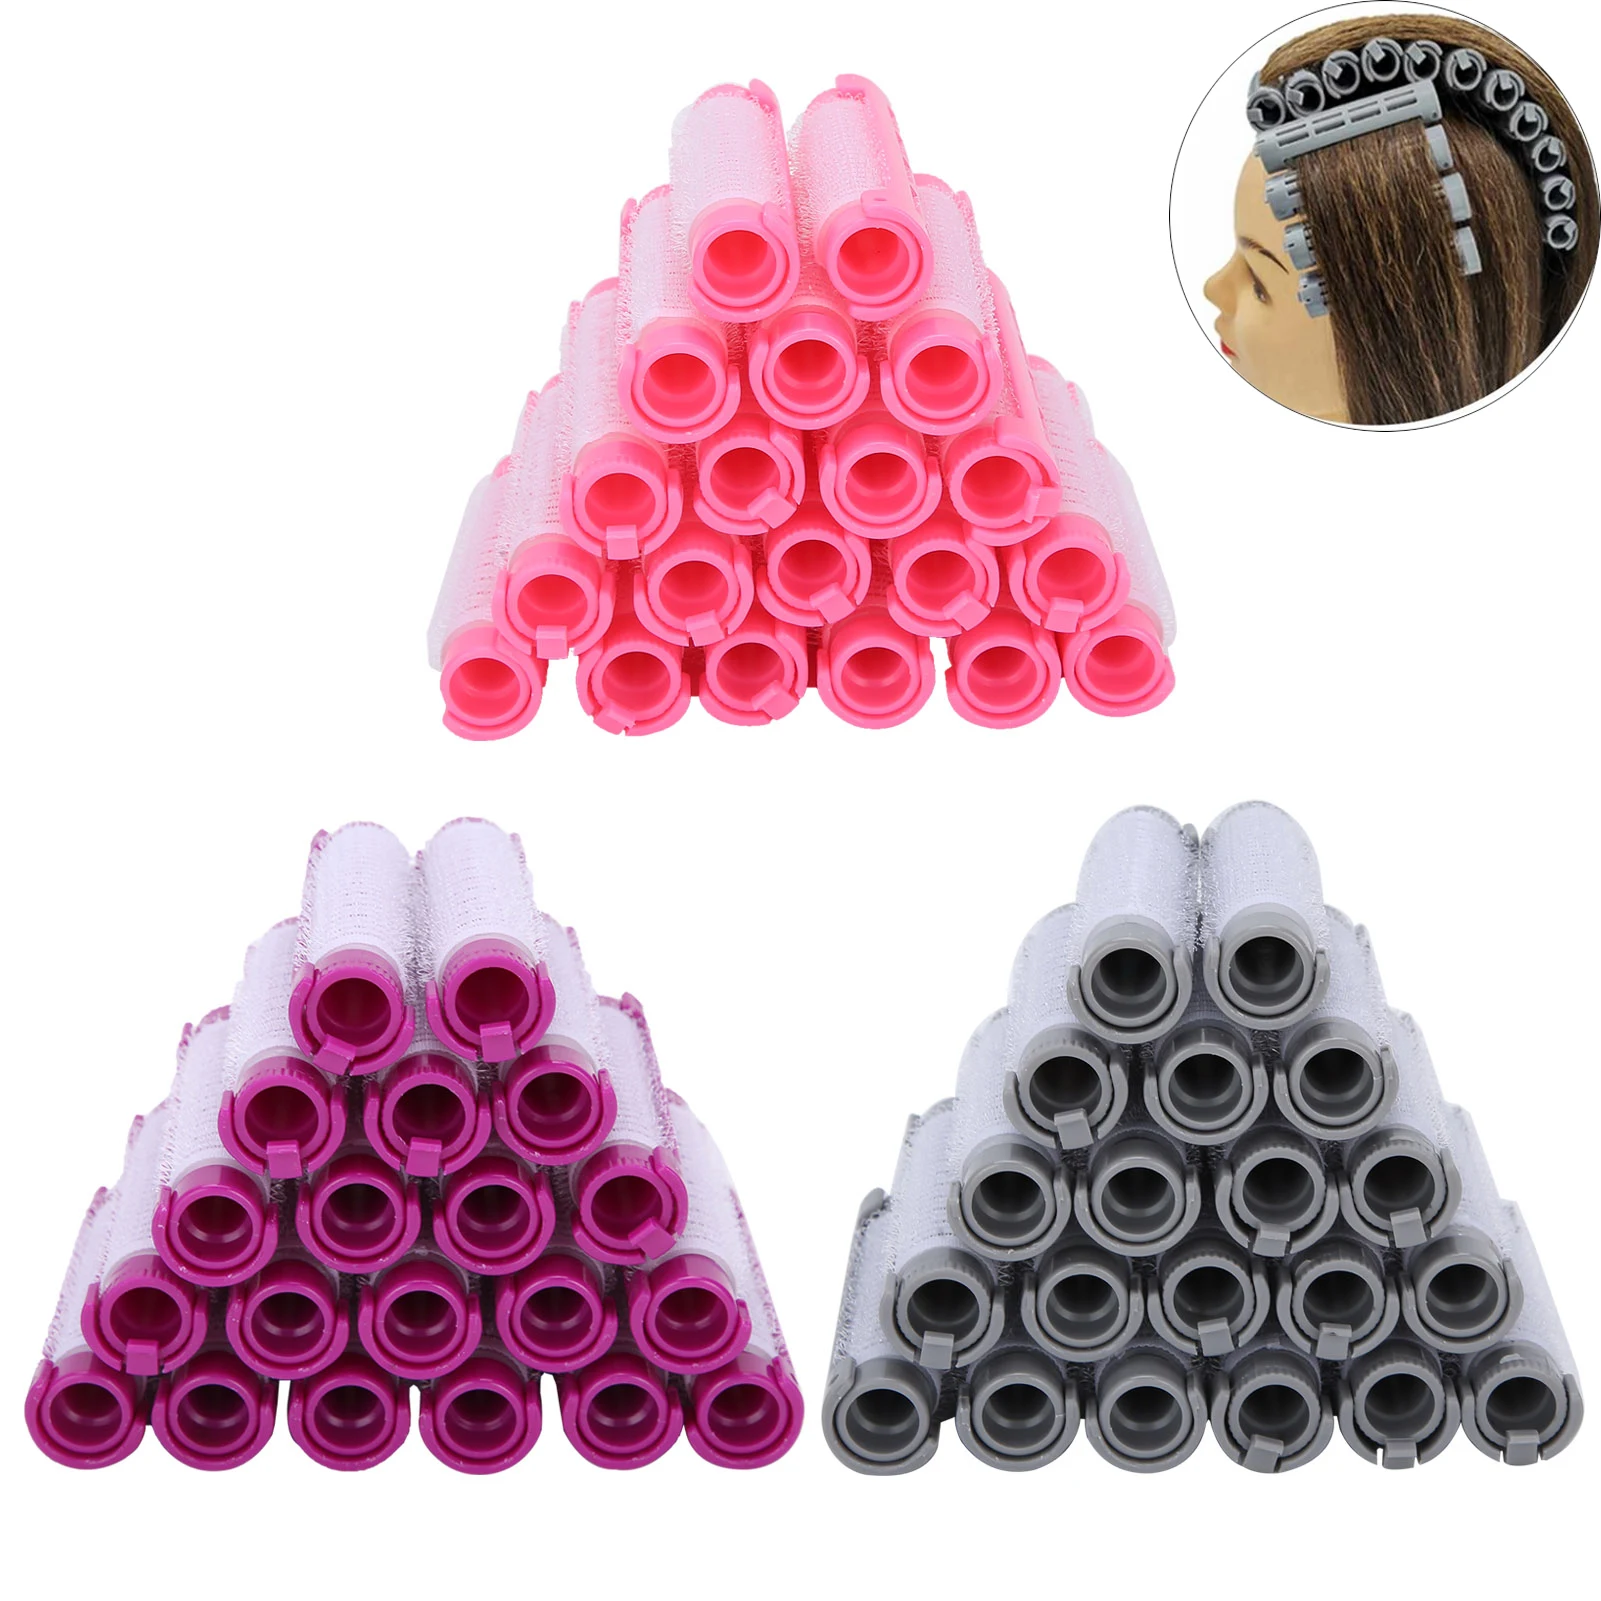 20Pcs/Set Professional Hair Root Rollers Clips Natural Fluffy Naturally Hair Curler Twist Wave Fluffy Plastic Hair Styling Tools